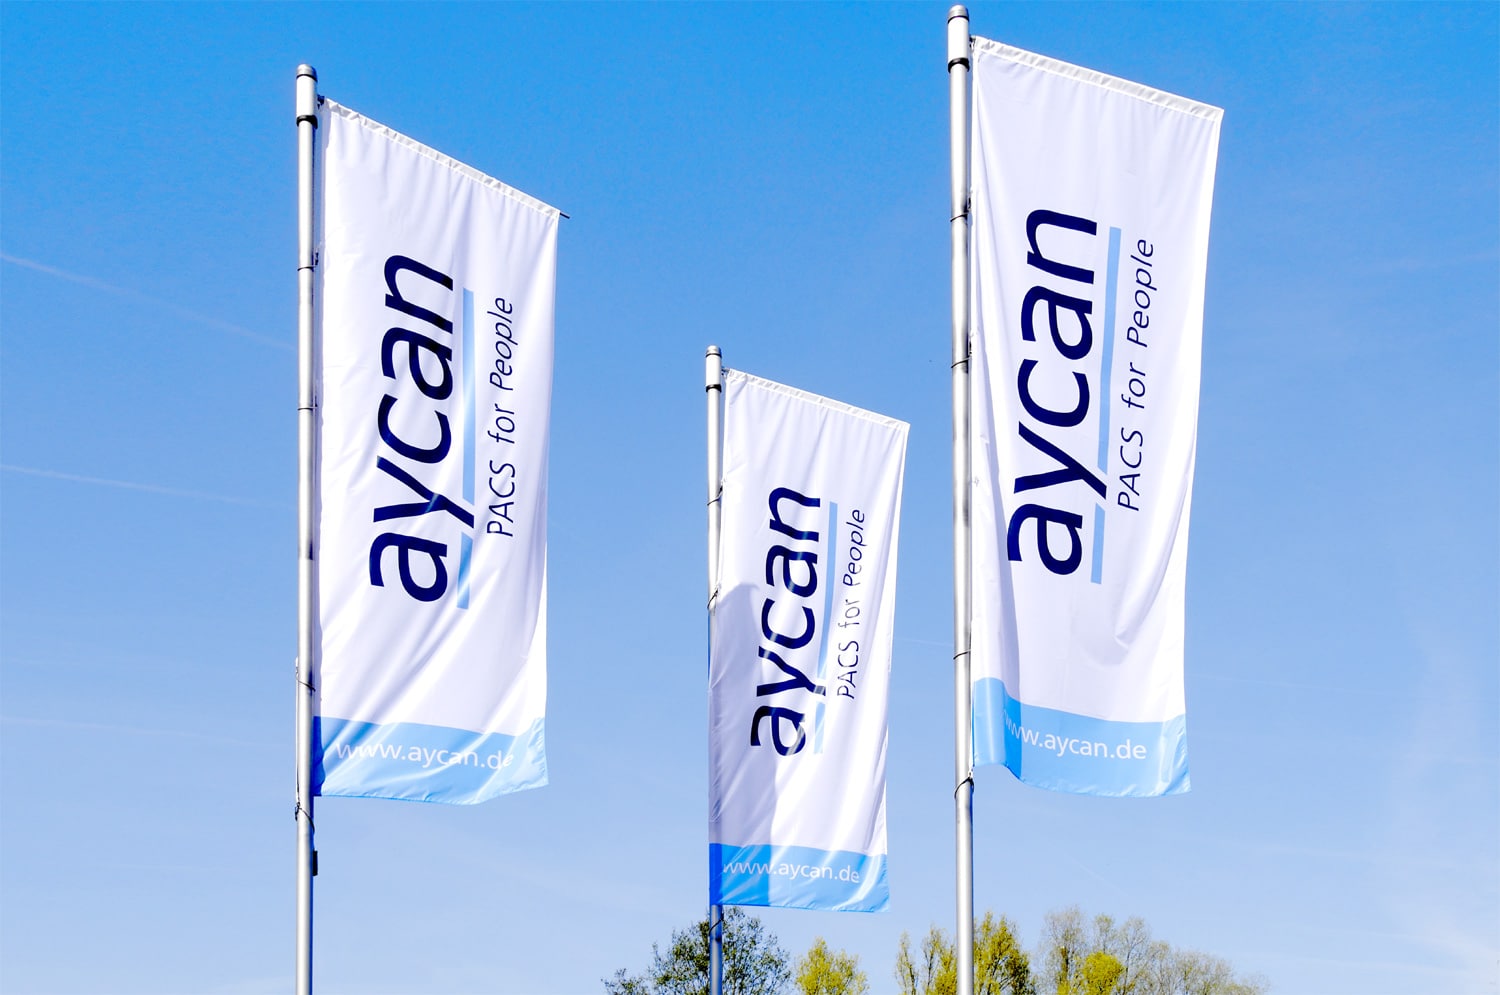 aycan Medical Systems corporate flags